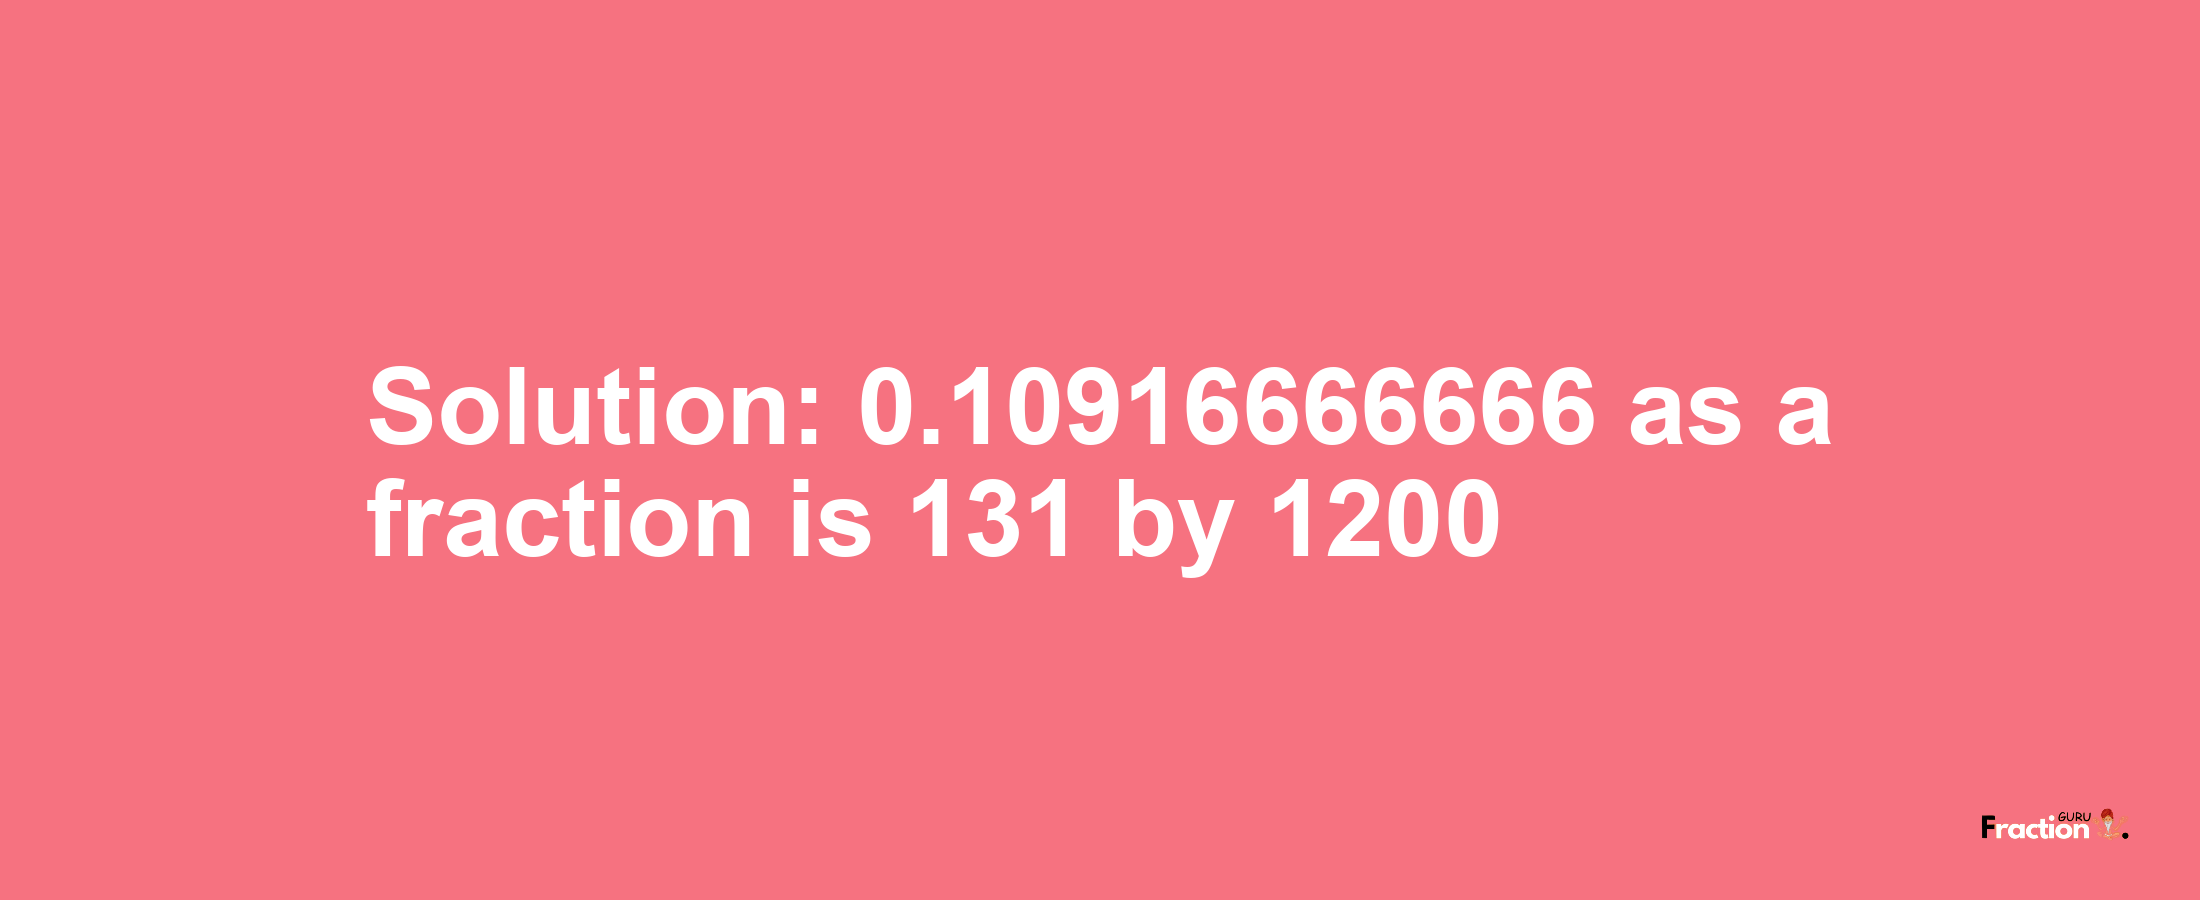 Solution:0.10916666666 as a fraction is 131/1200